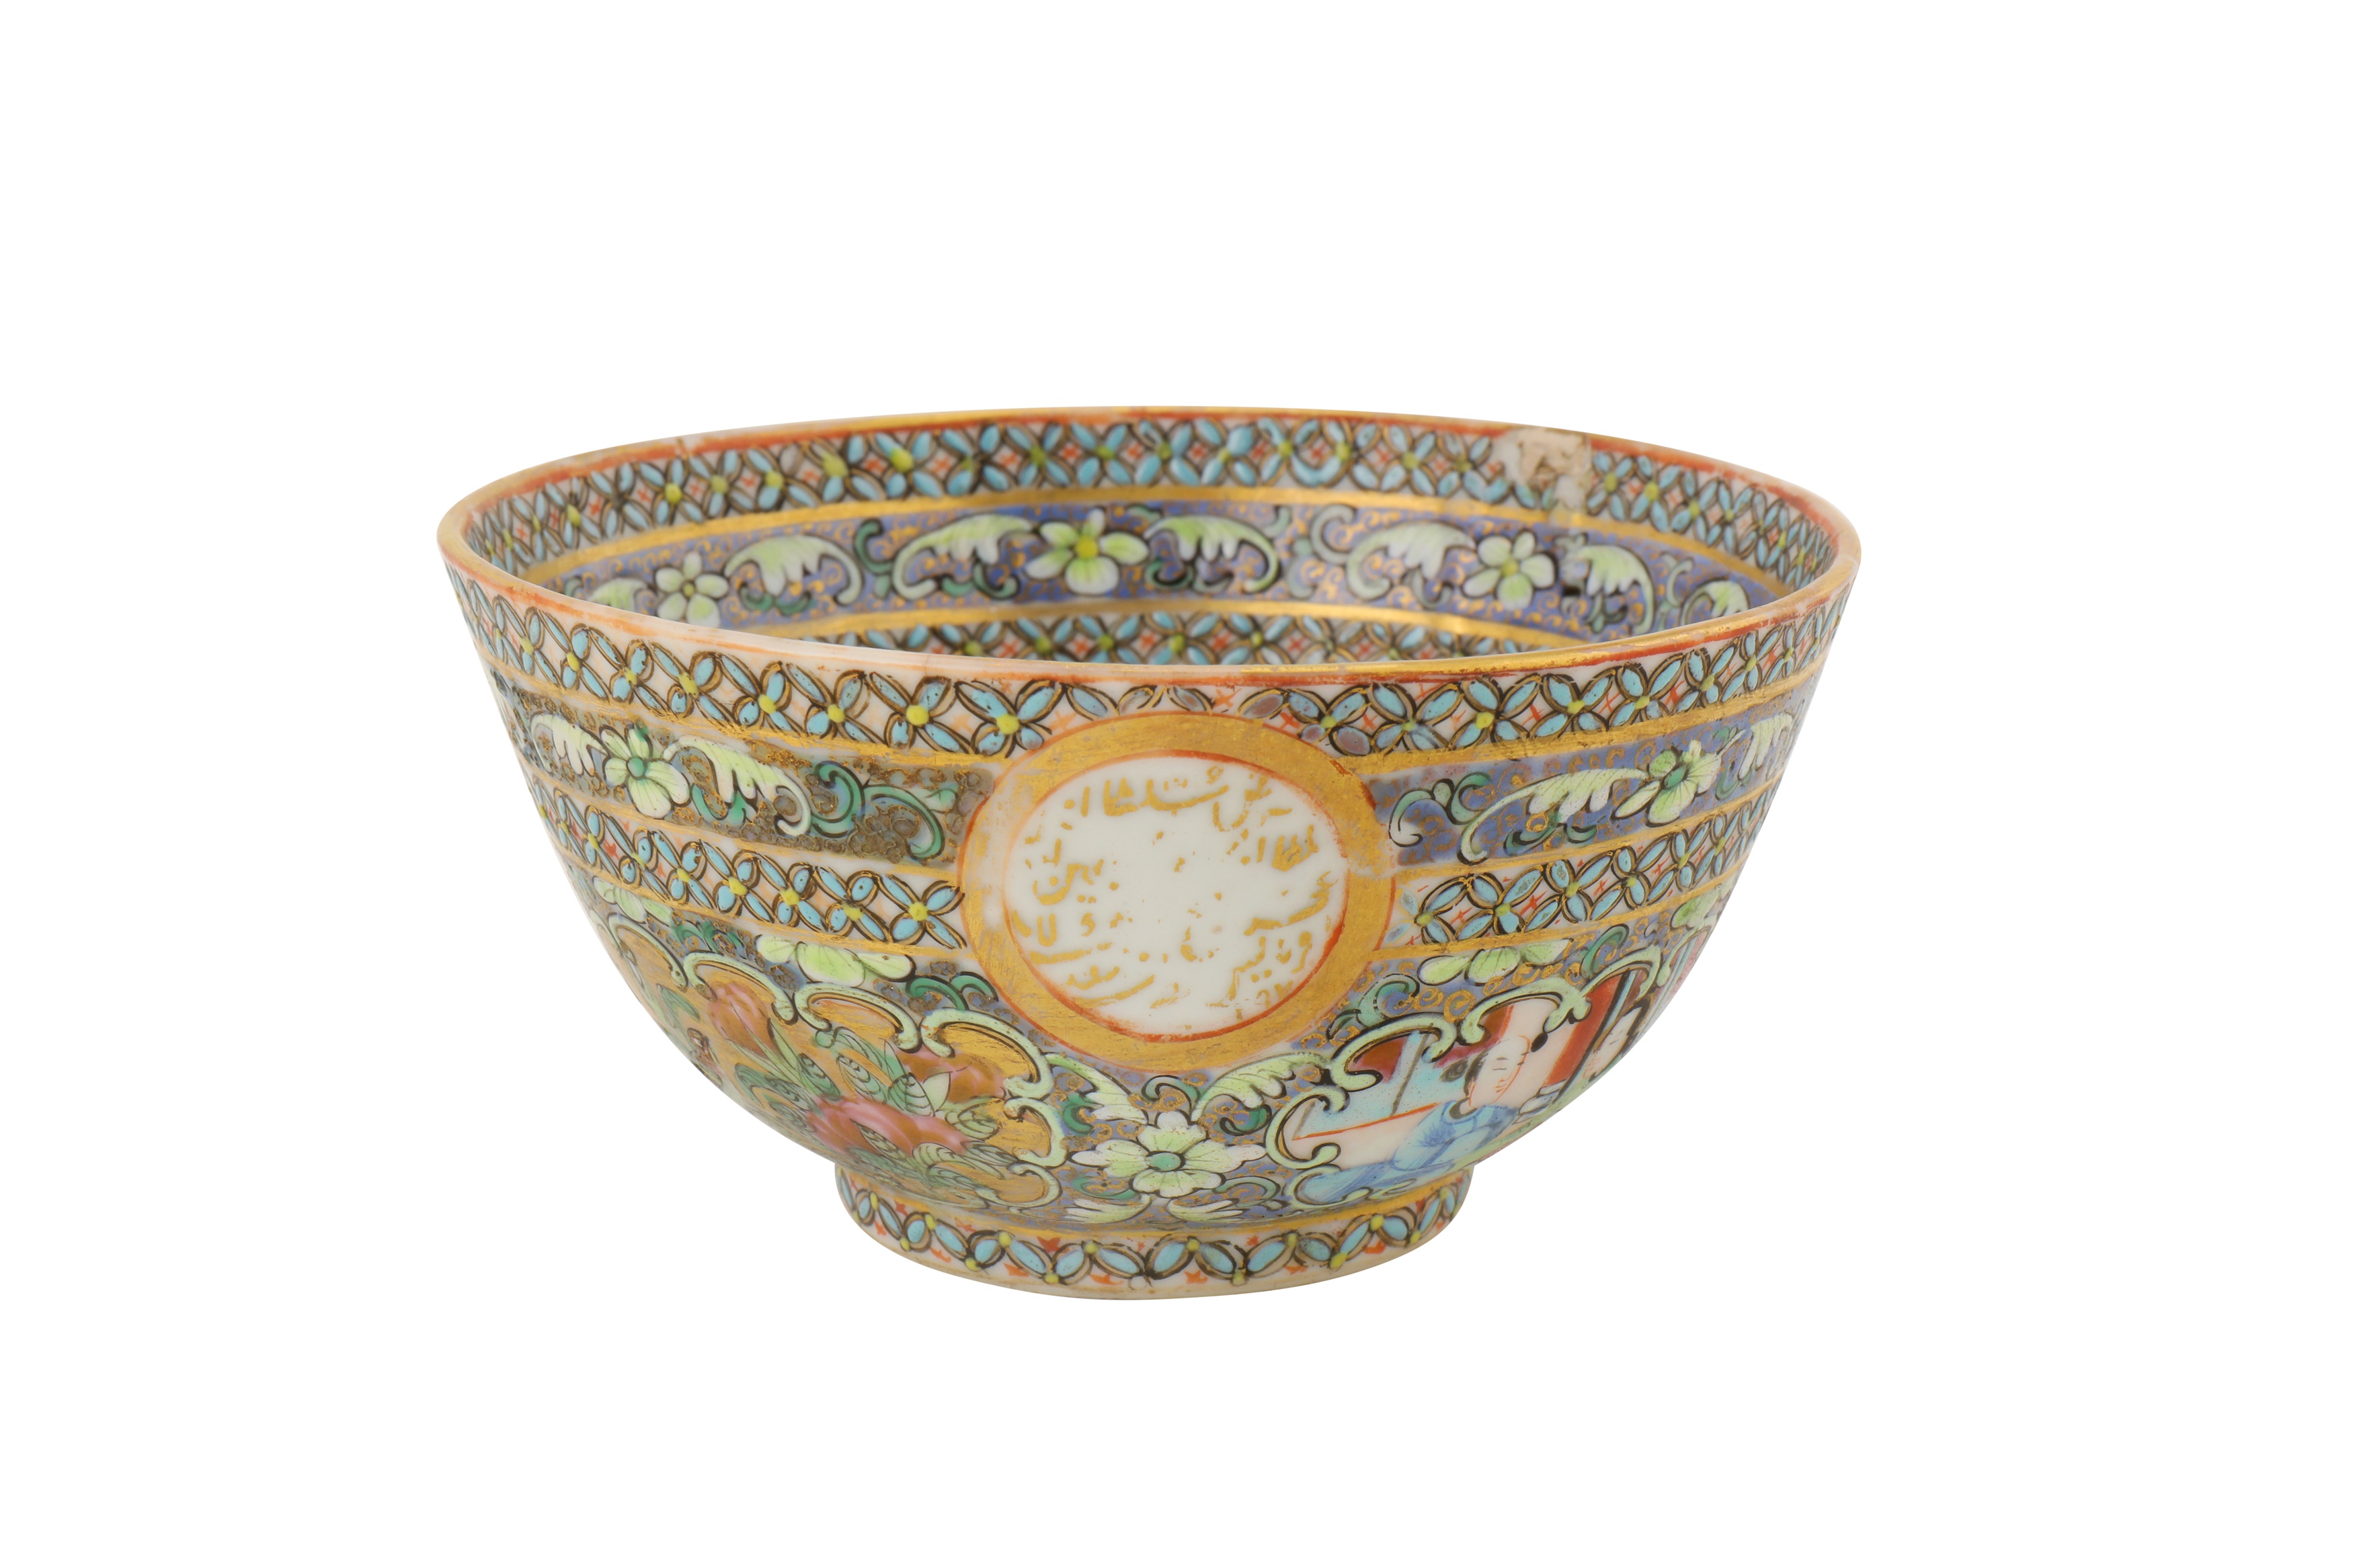 A MEDIUM-SIZED BOWL AND DISH AND SMALLER BOWL FROM THE ZILL AL-SULTAN CANTON PORCELAIN SERVICE - Image 3 of 17